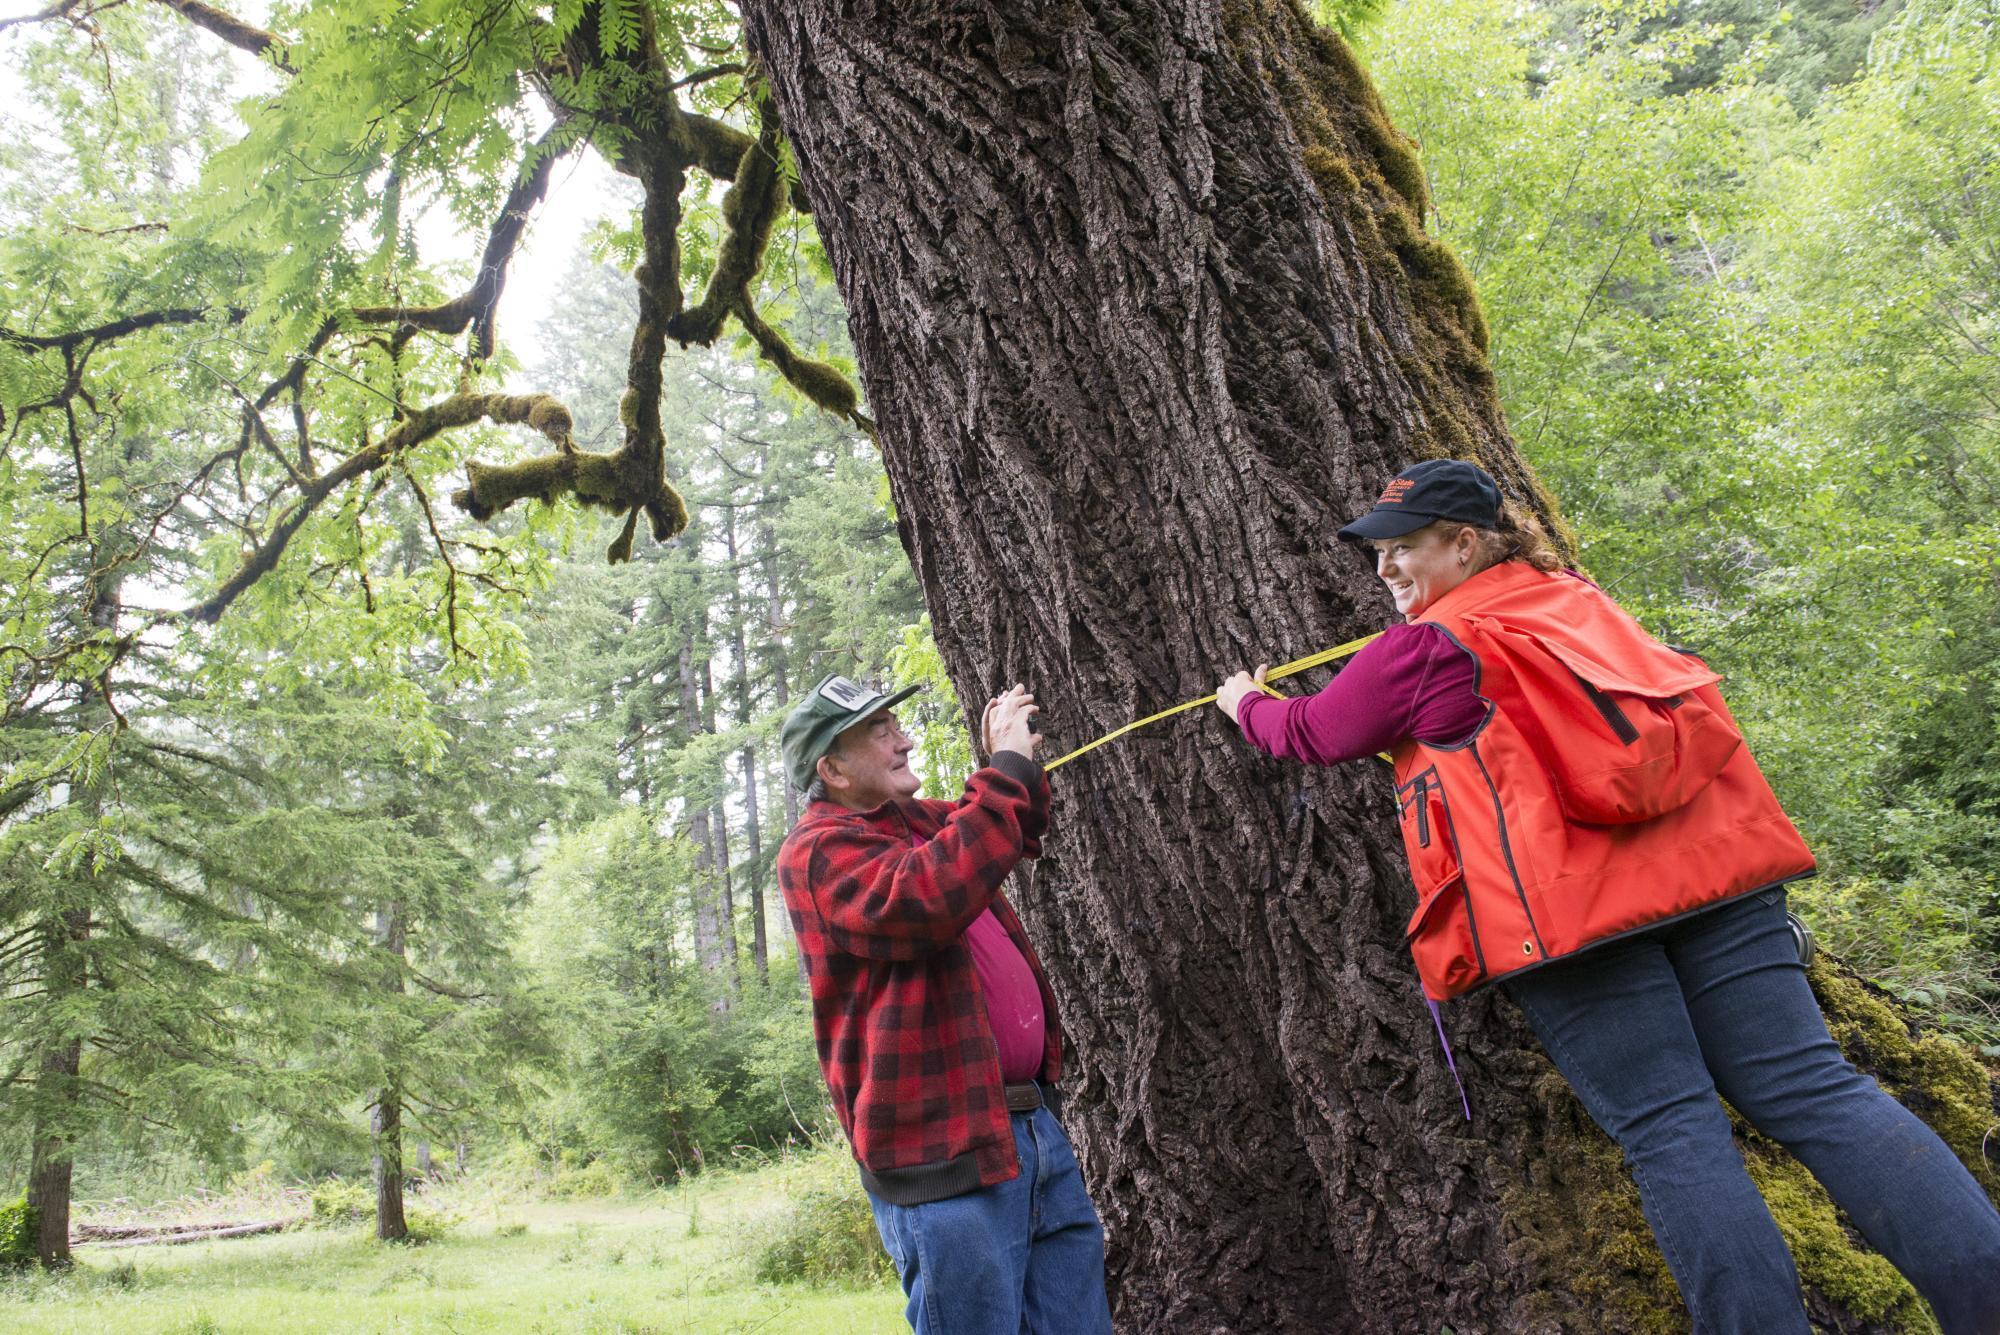 Lauren Grand, OSU Lane County Extension Forestry faculty member, and Master Woodland Manager Dick Beers measuring the diameter of a walnut tree on  the Beers Tree Farm.